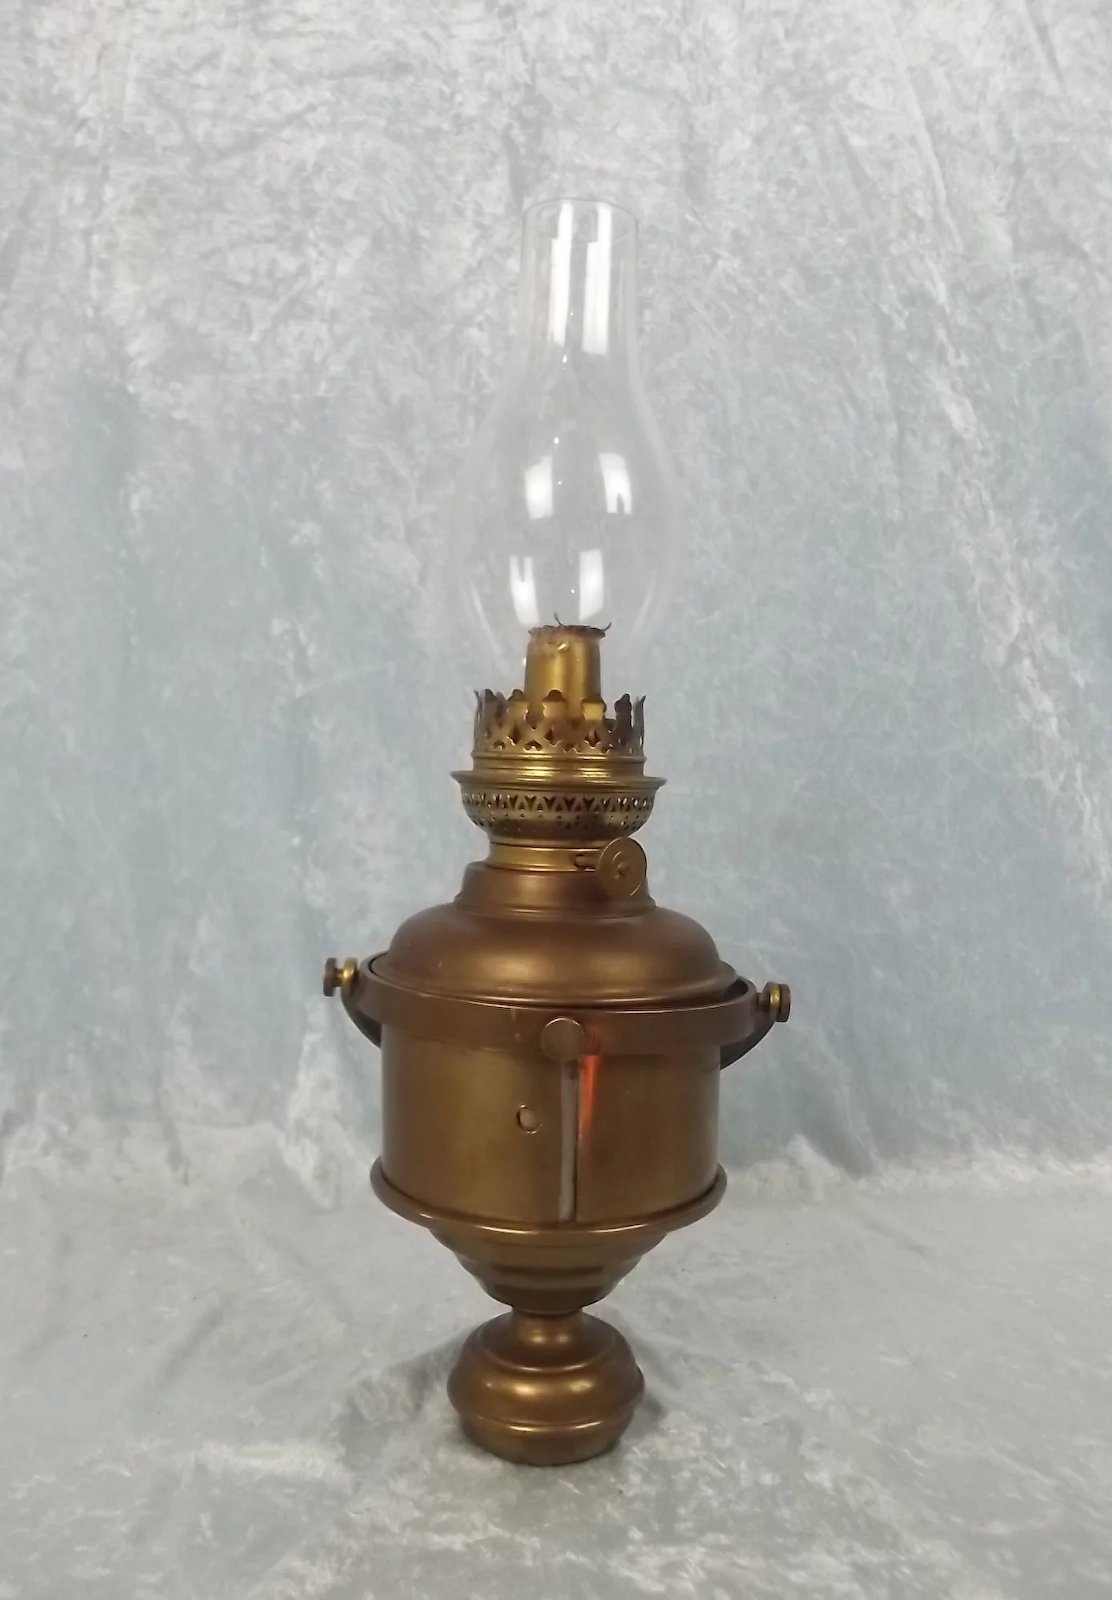 Zero Stock-Antique Ship's Gimbaled Oil Lamp Made in England